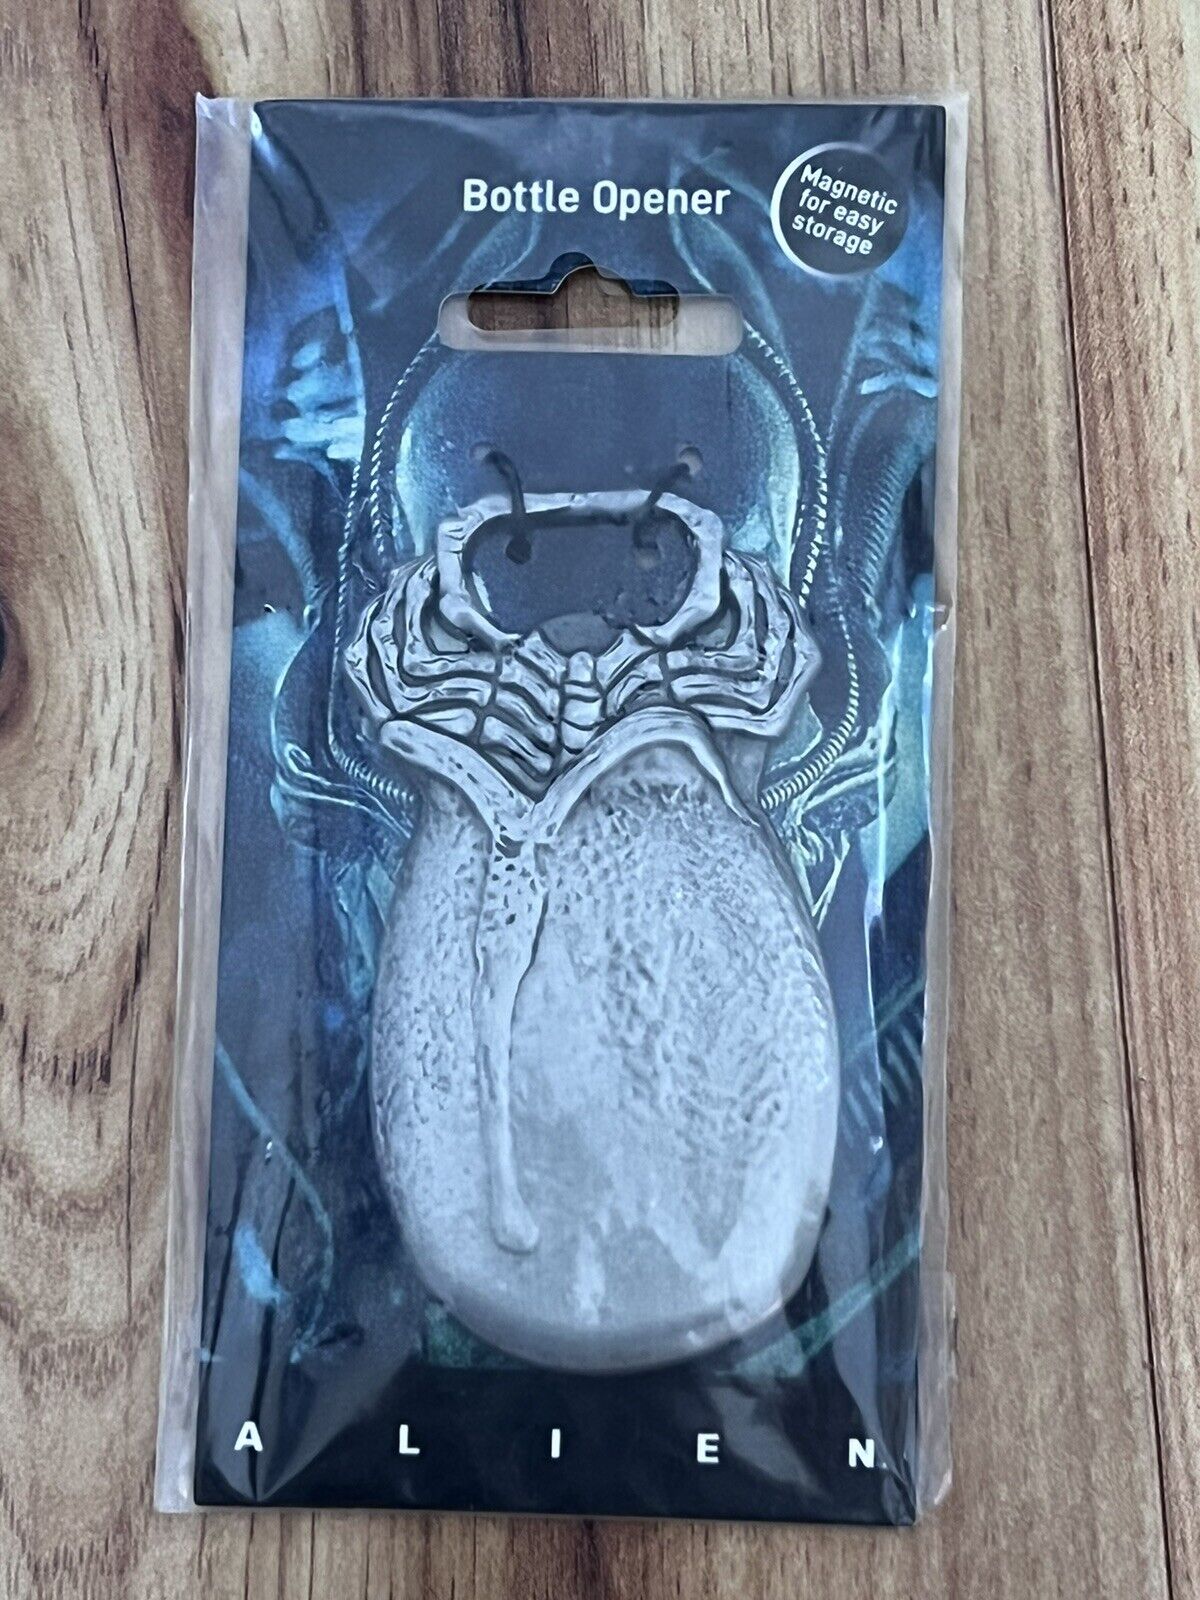 Official Alien Bottle Opener Facehugger 40th Anniversary Edition Magnetic New